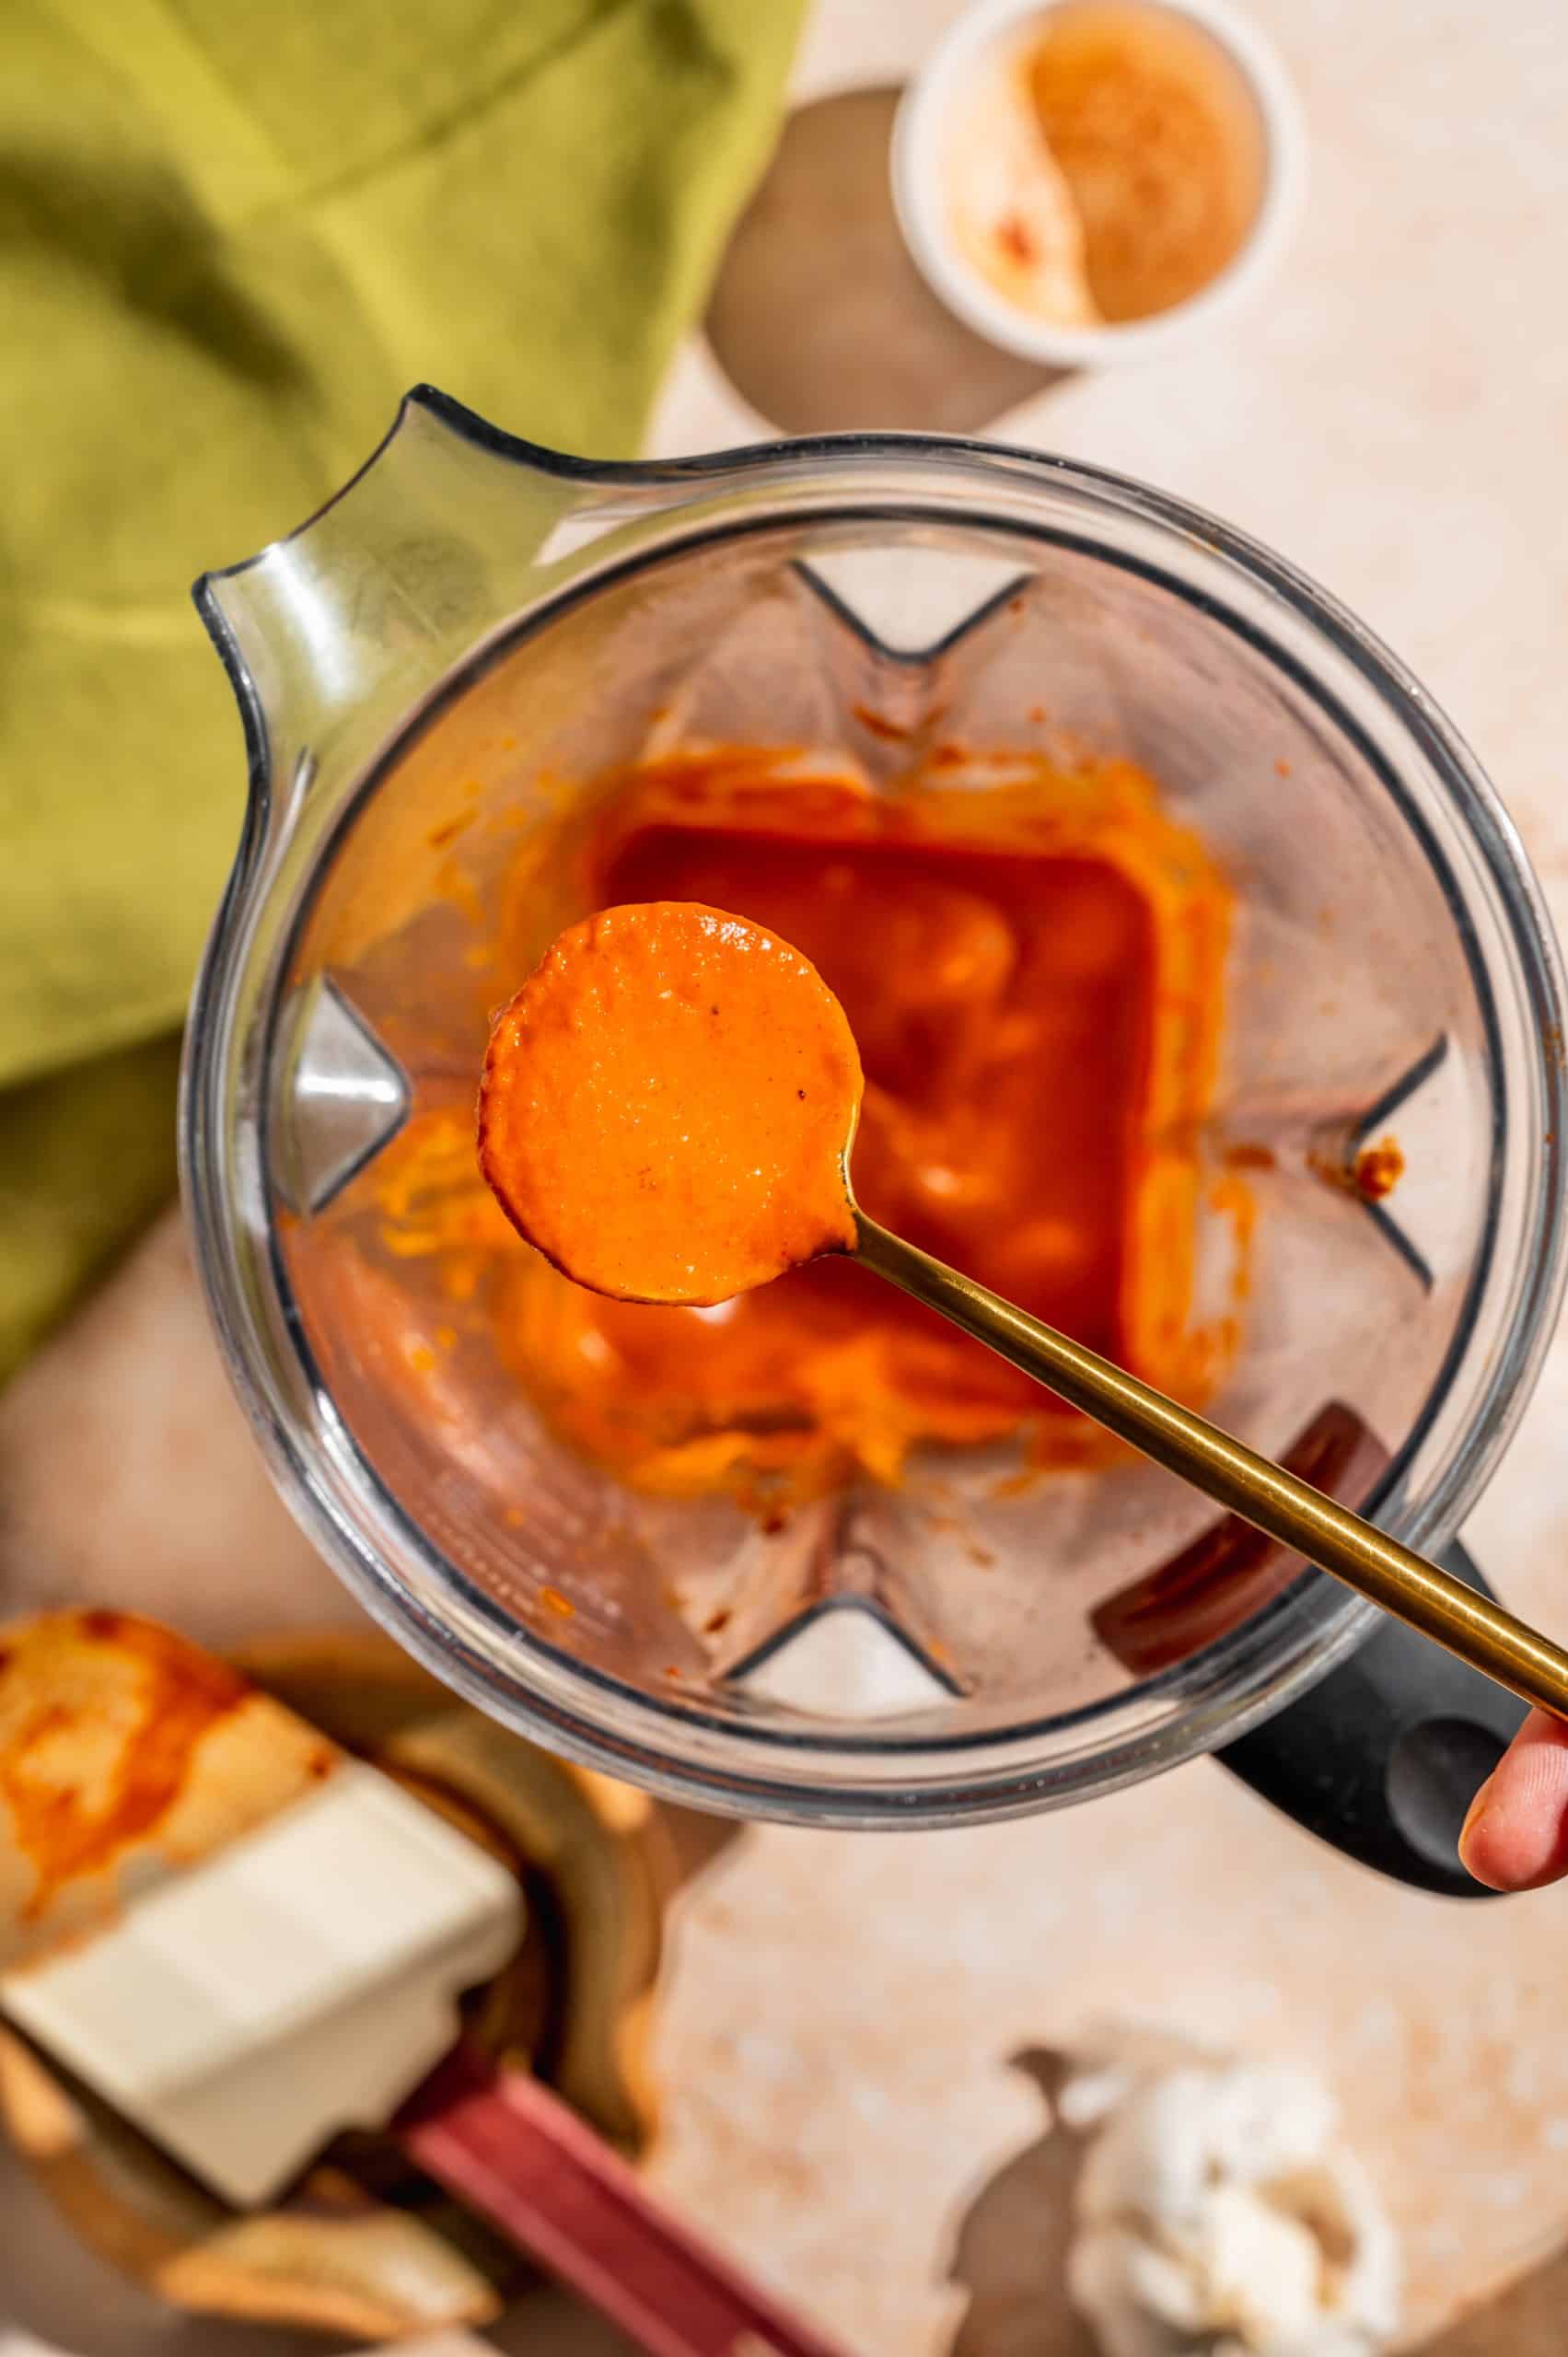 gold spoon holding smooth red-orange sauce over a blender